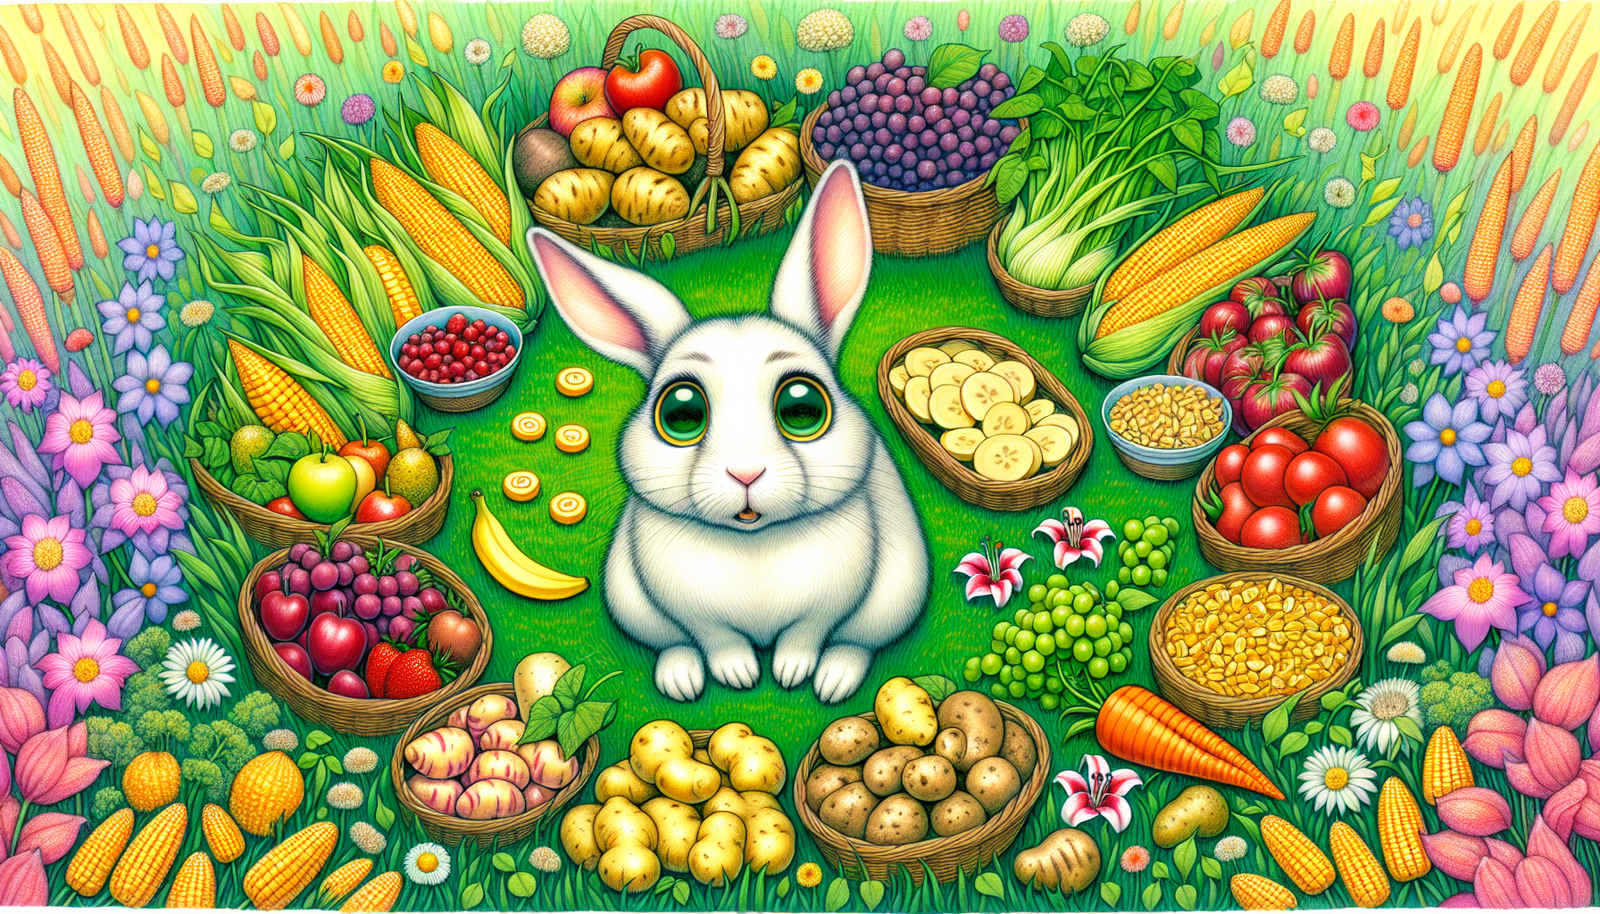 Whimsical illustration of a rabbit surrounded by forbidden foods